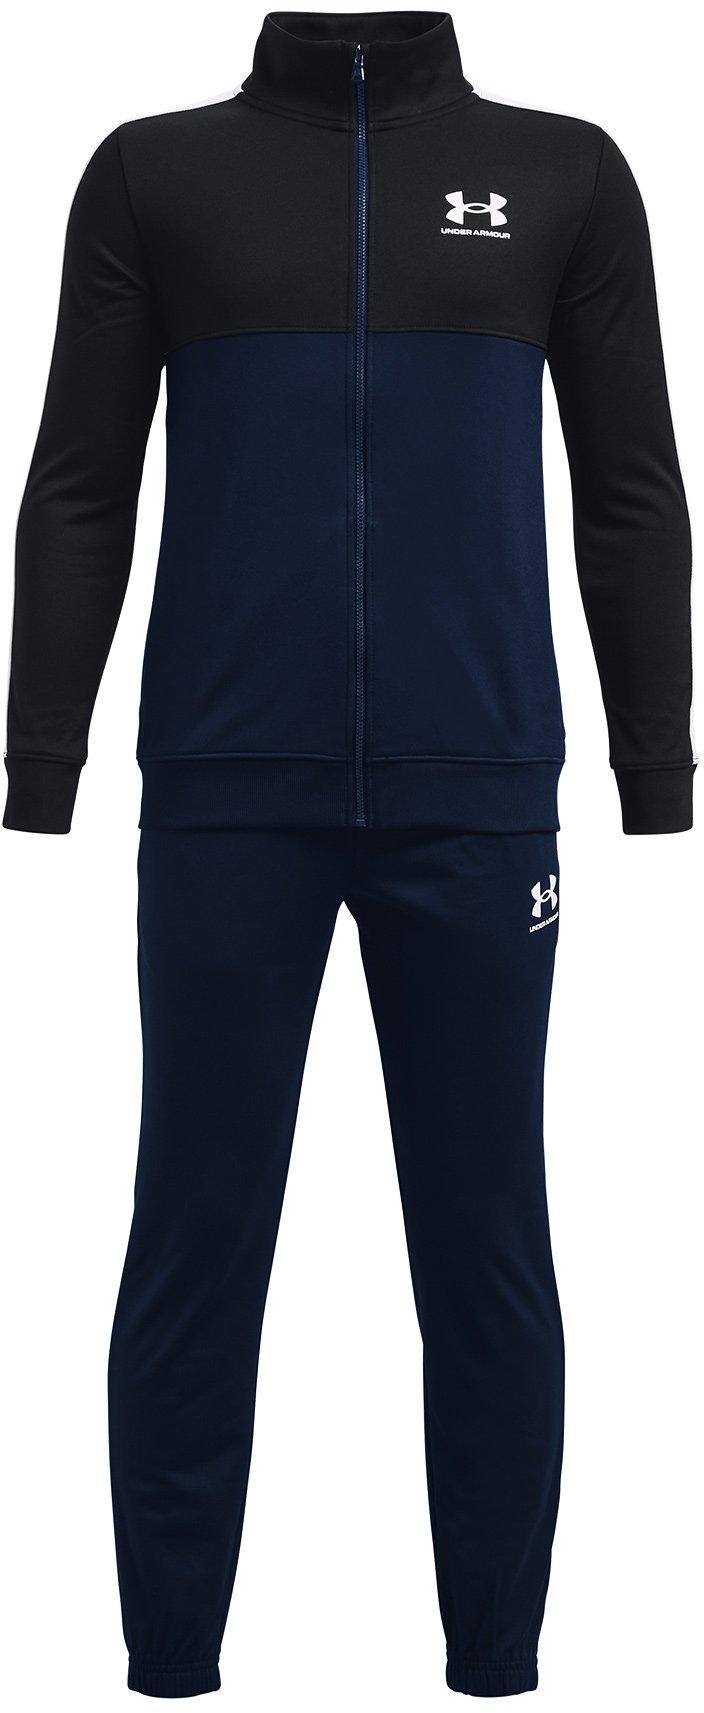 Under Armour CB Knit Track Suit-NVY XL